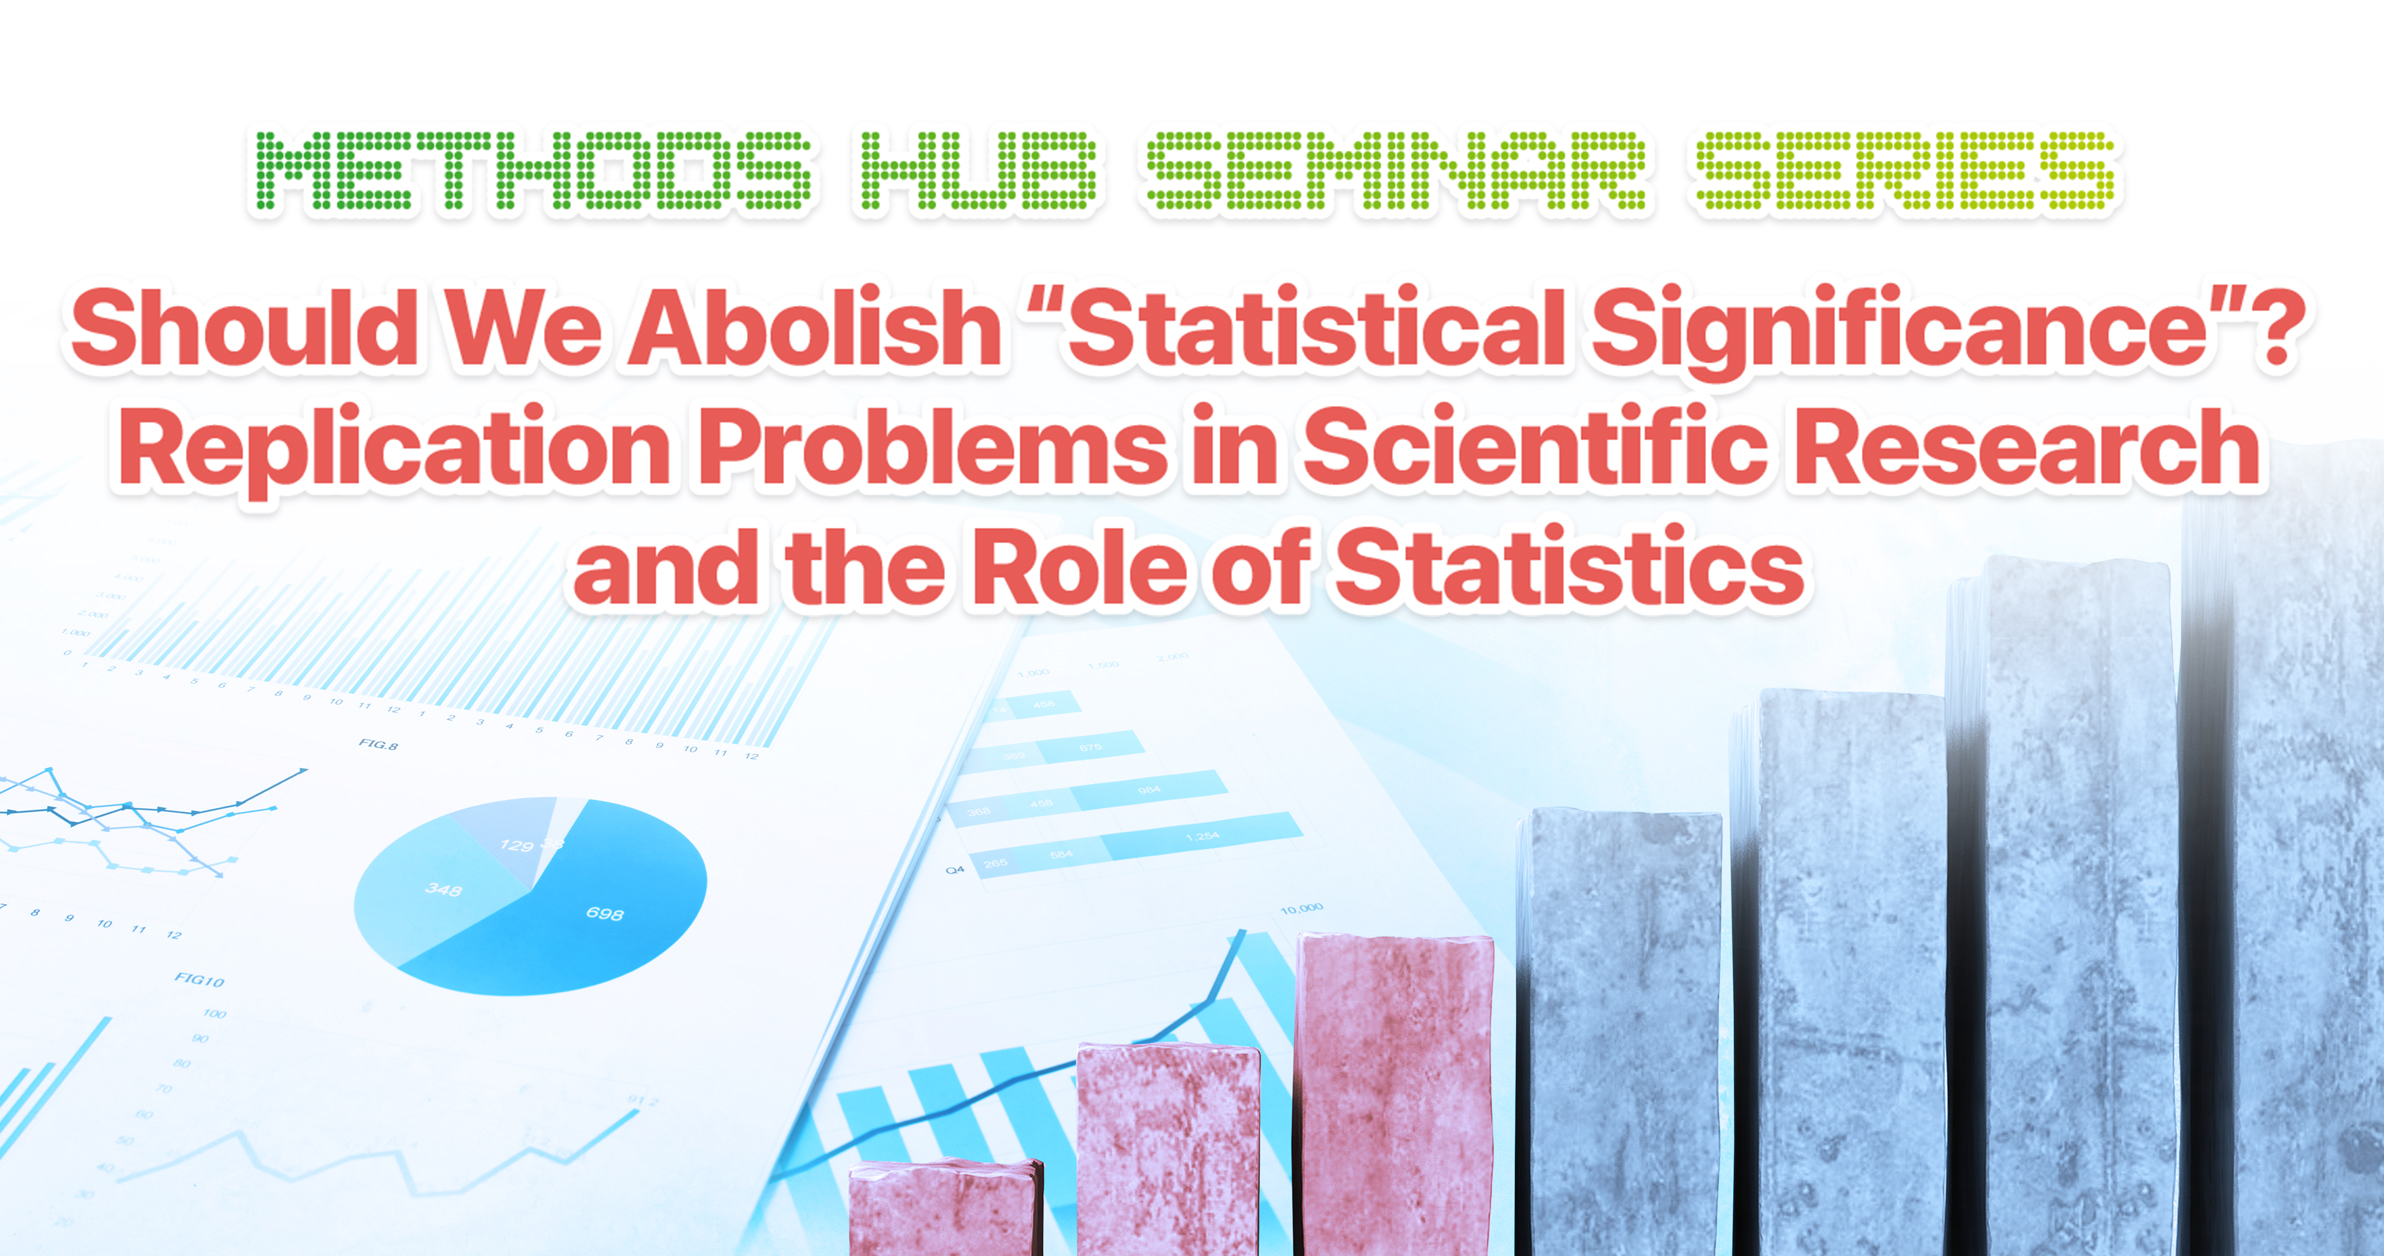 Methods Hub Seminar Series: Should We Abolish “Statistical Significance”? Replication Problems in Scientific Research and the Role of Statistics